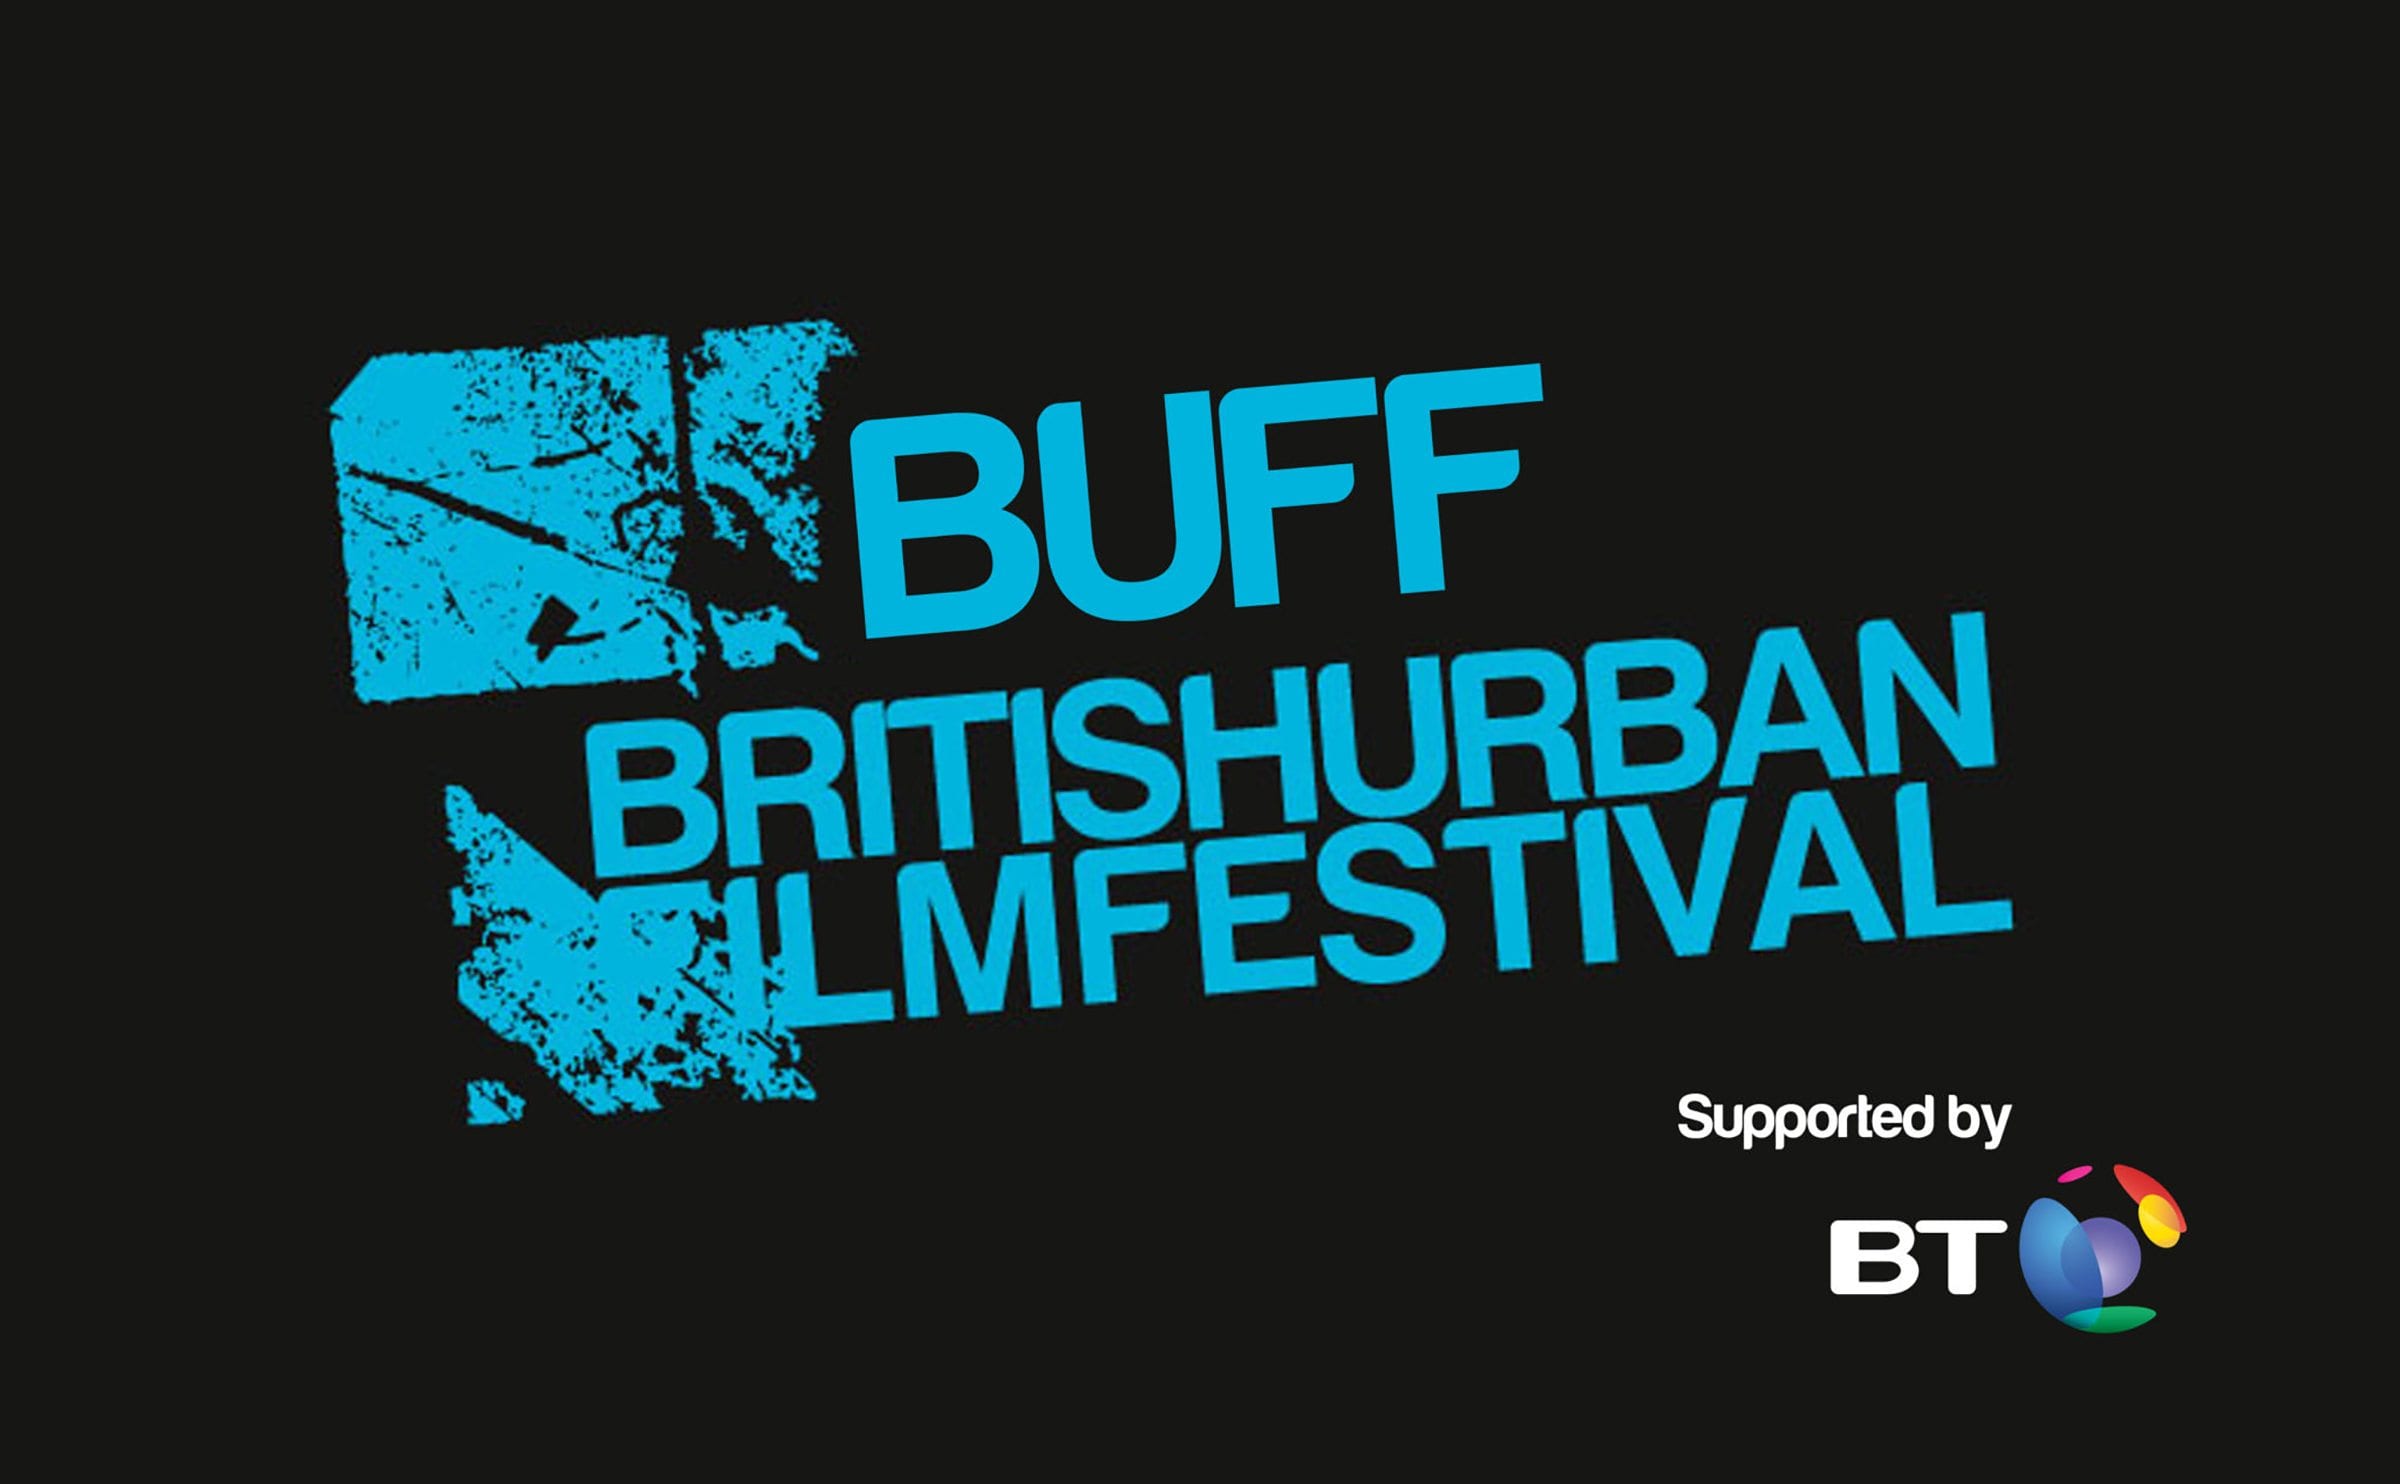 The British Urban Film Festival (BUFF) has announced a partnership with leading telecommunications provider BT, with events held at the BT Tower in London.